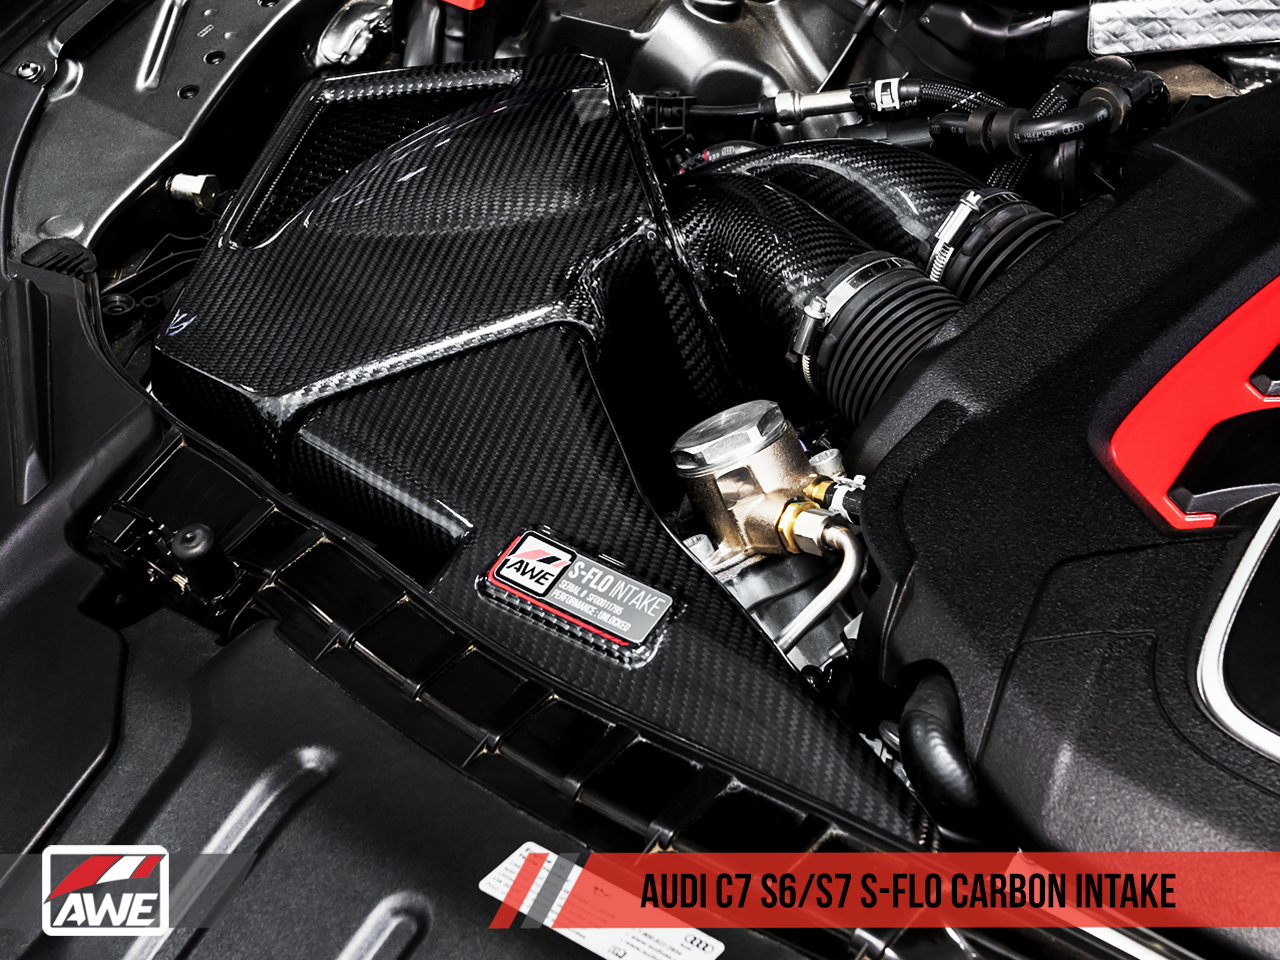 AWE S-FLO Carbon Intake for Audi C7 S6 / S7 - 0